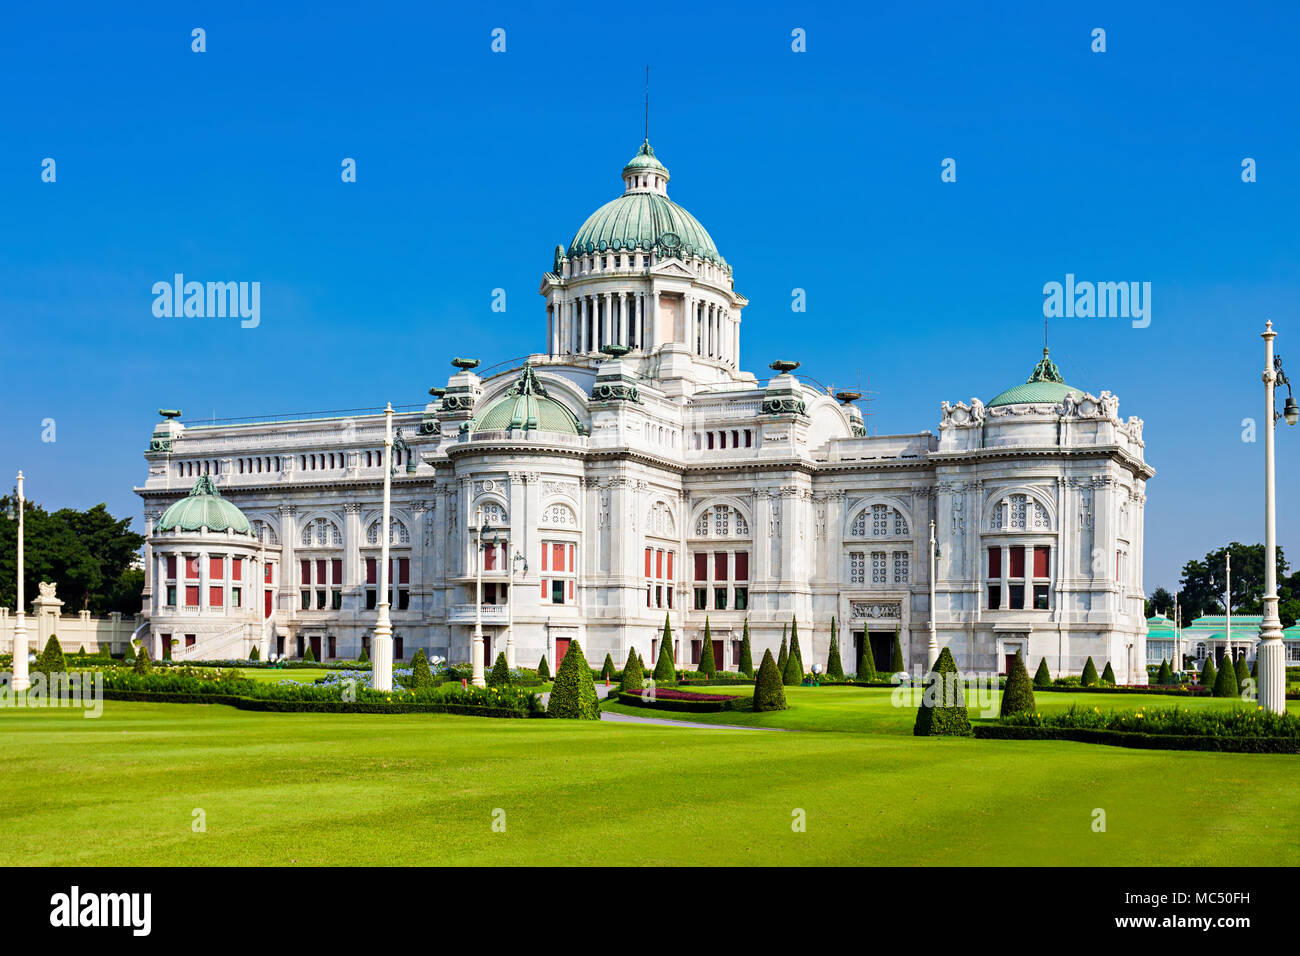 The Ananta Samakhom Throne Hall is a former reception hall within Dusit Palace in Bangkok, Thailand Stock Photo